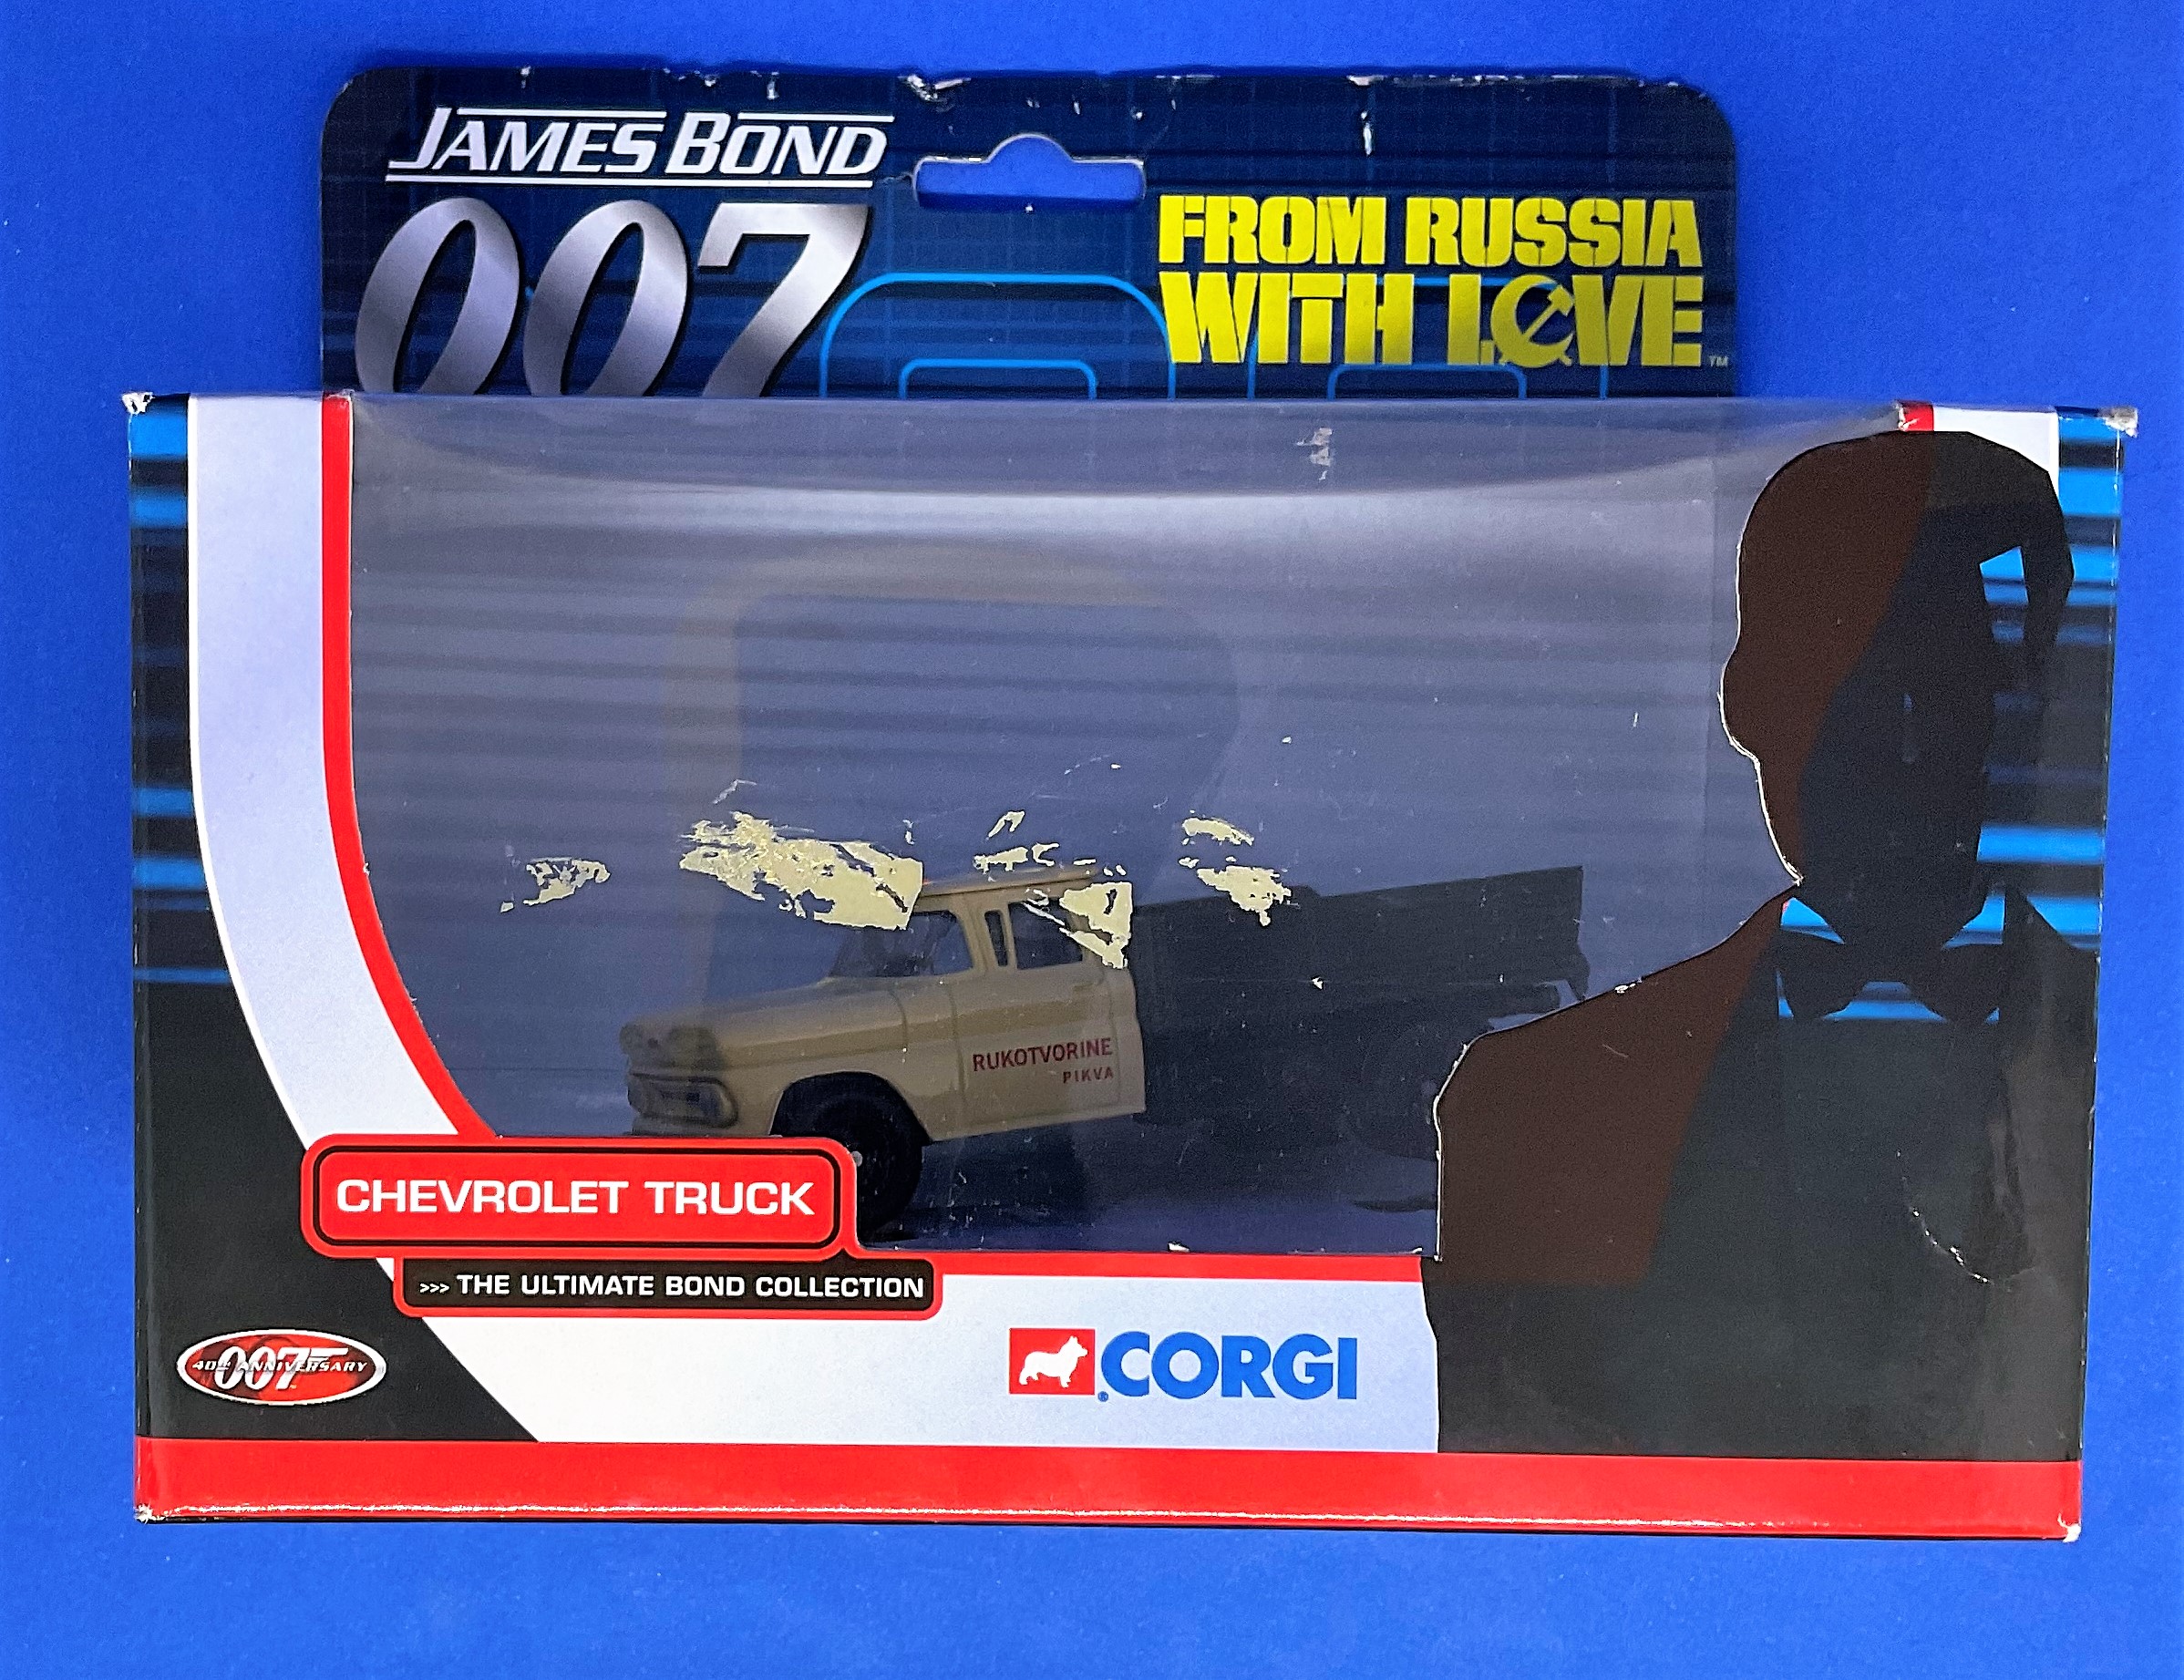 James Bond 007 Corgi The Ultimate Collection Chevrolet Truck die cast model from the film From - Image 2 of 2